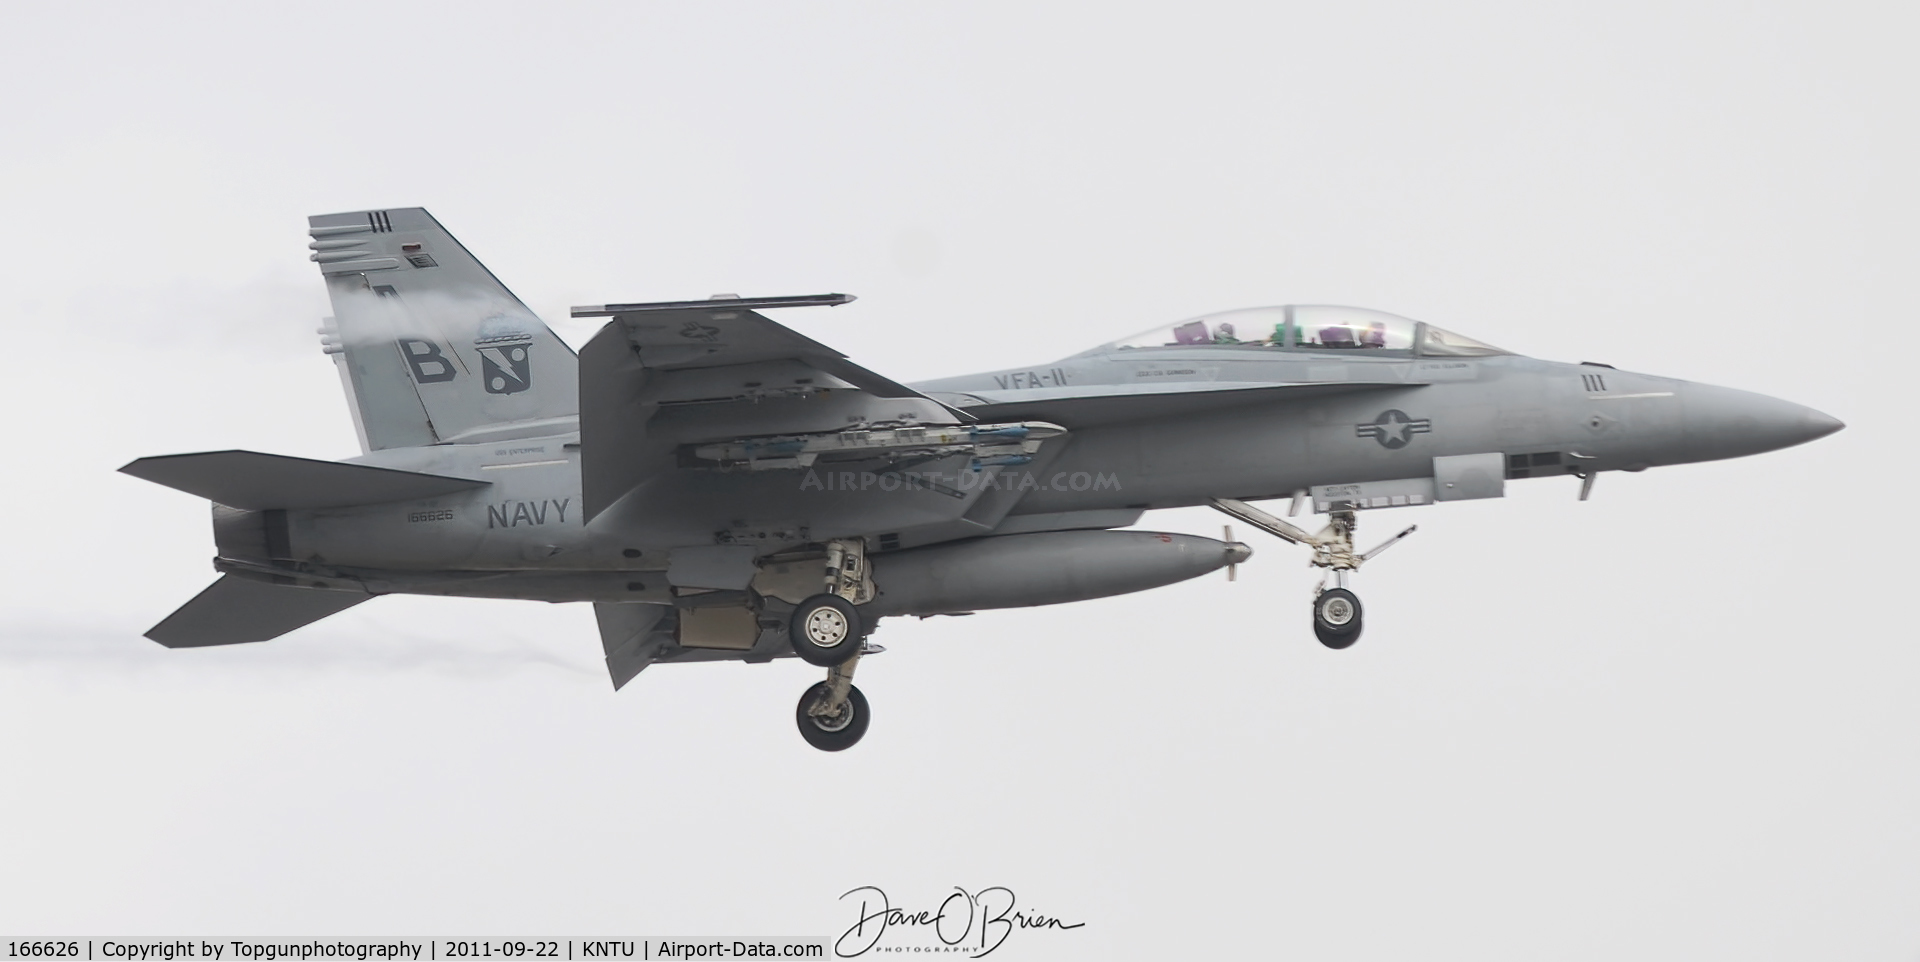 166626, Boeing F/A-18F Super Hornet C/N F119, Super Hornet with a refueling tank on its centerline.